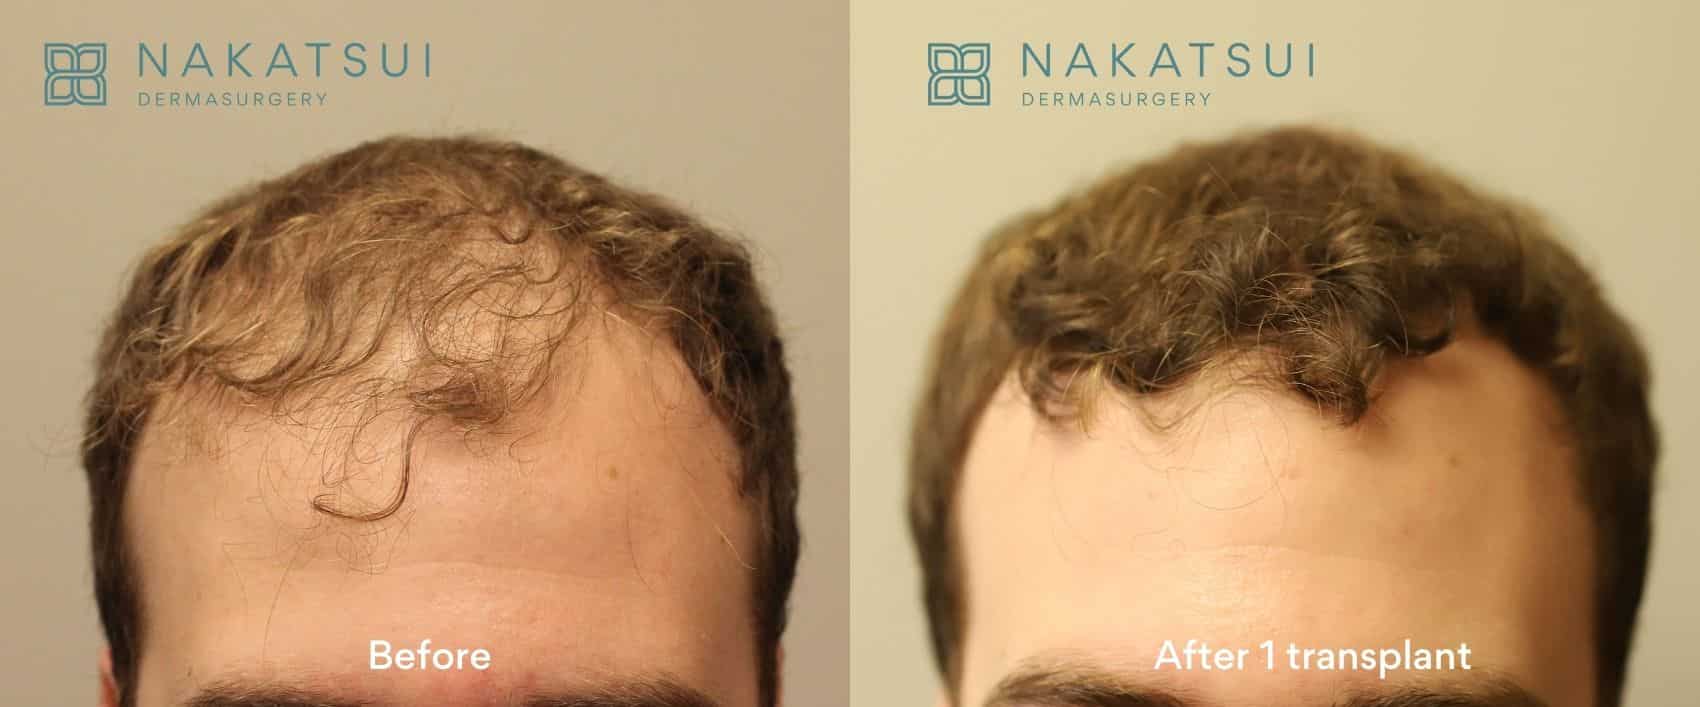 before and after hair transplant calgary